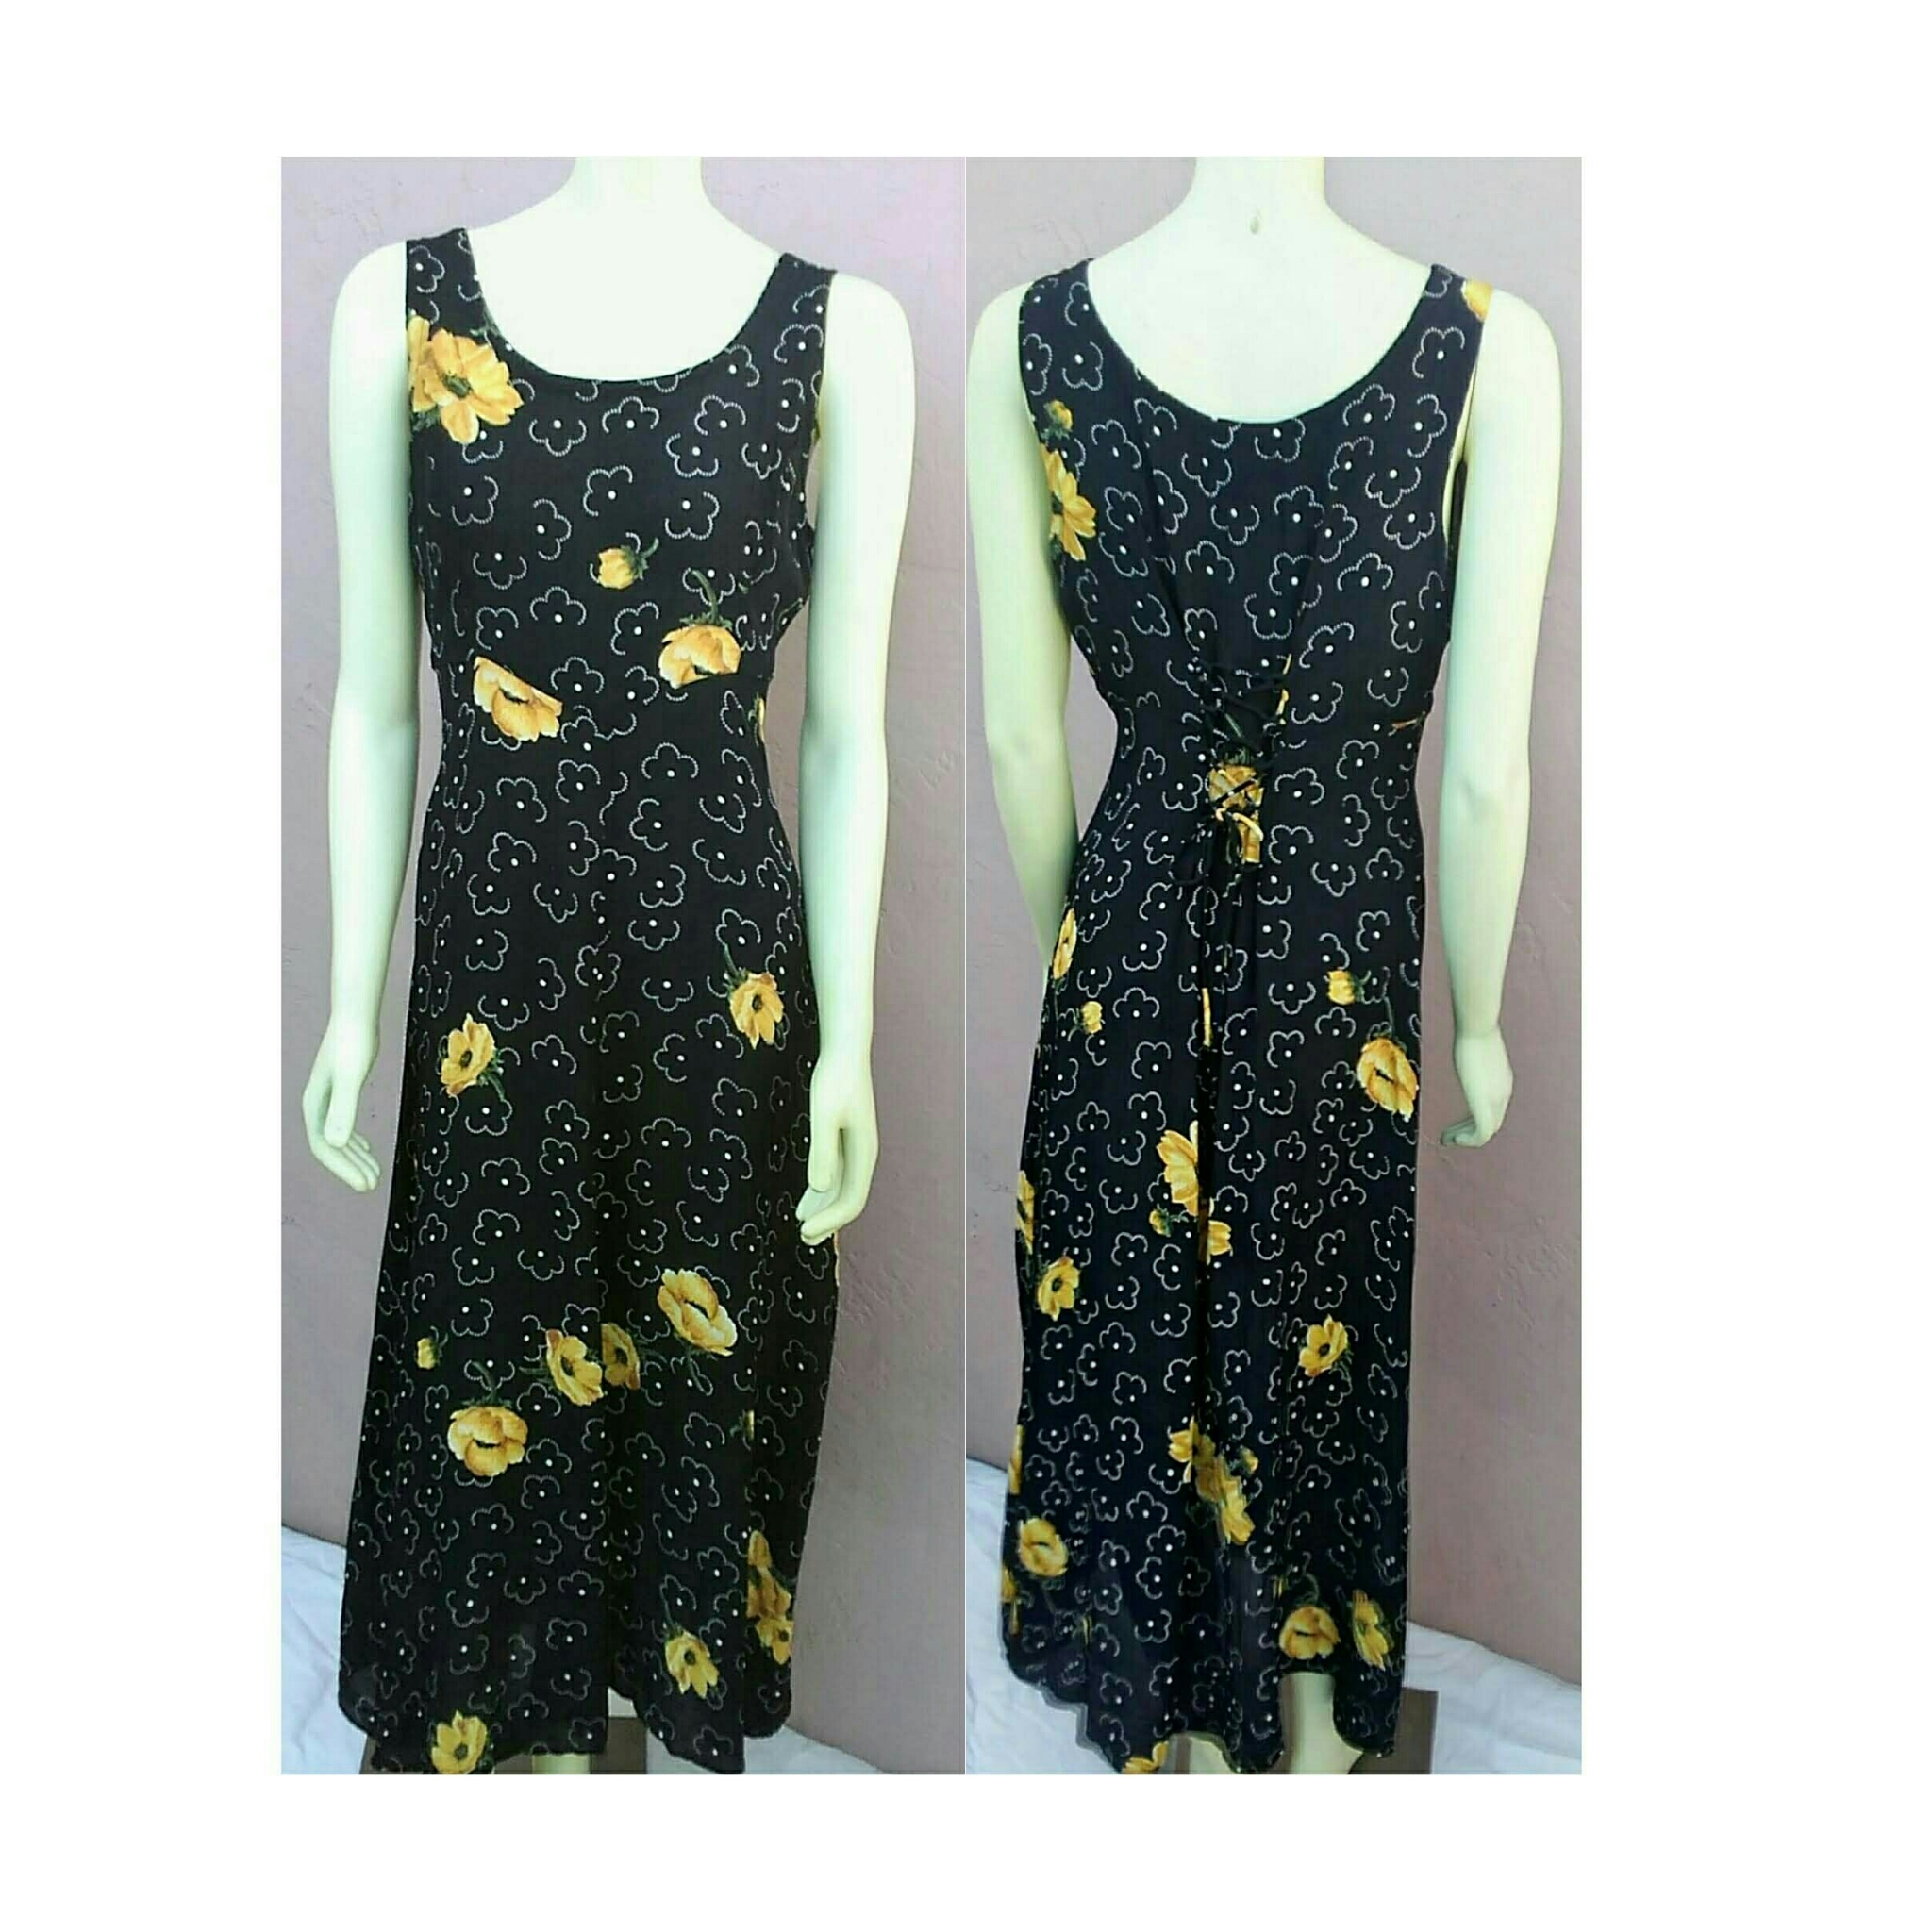 Vintage 1980’s Dress by Starina in Black, Yellow & White